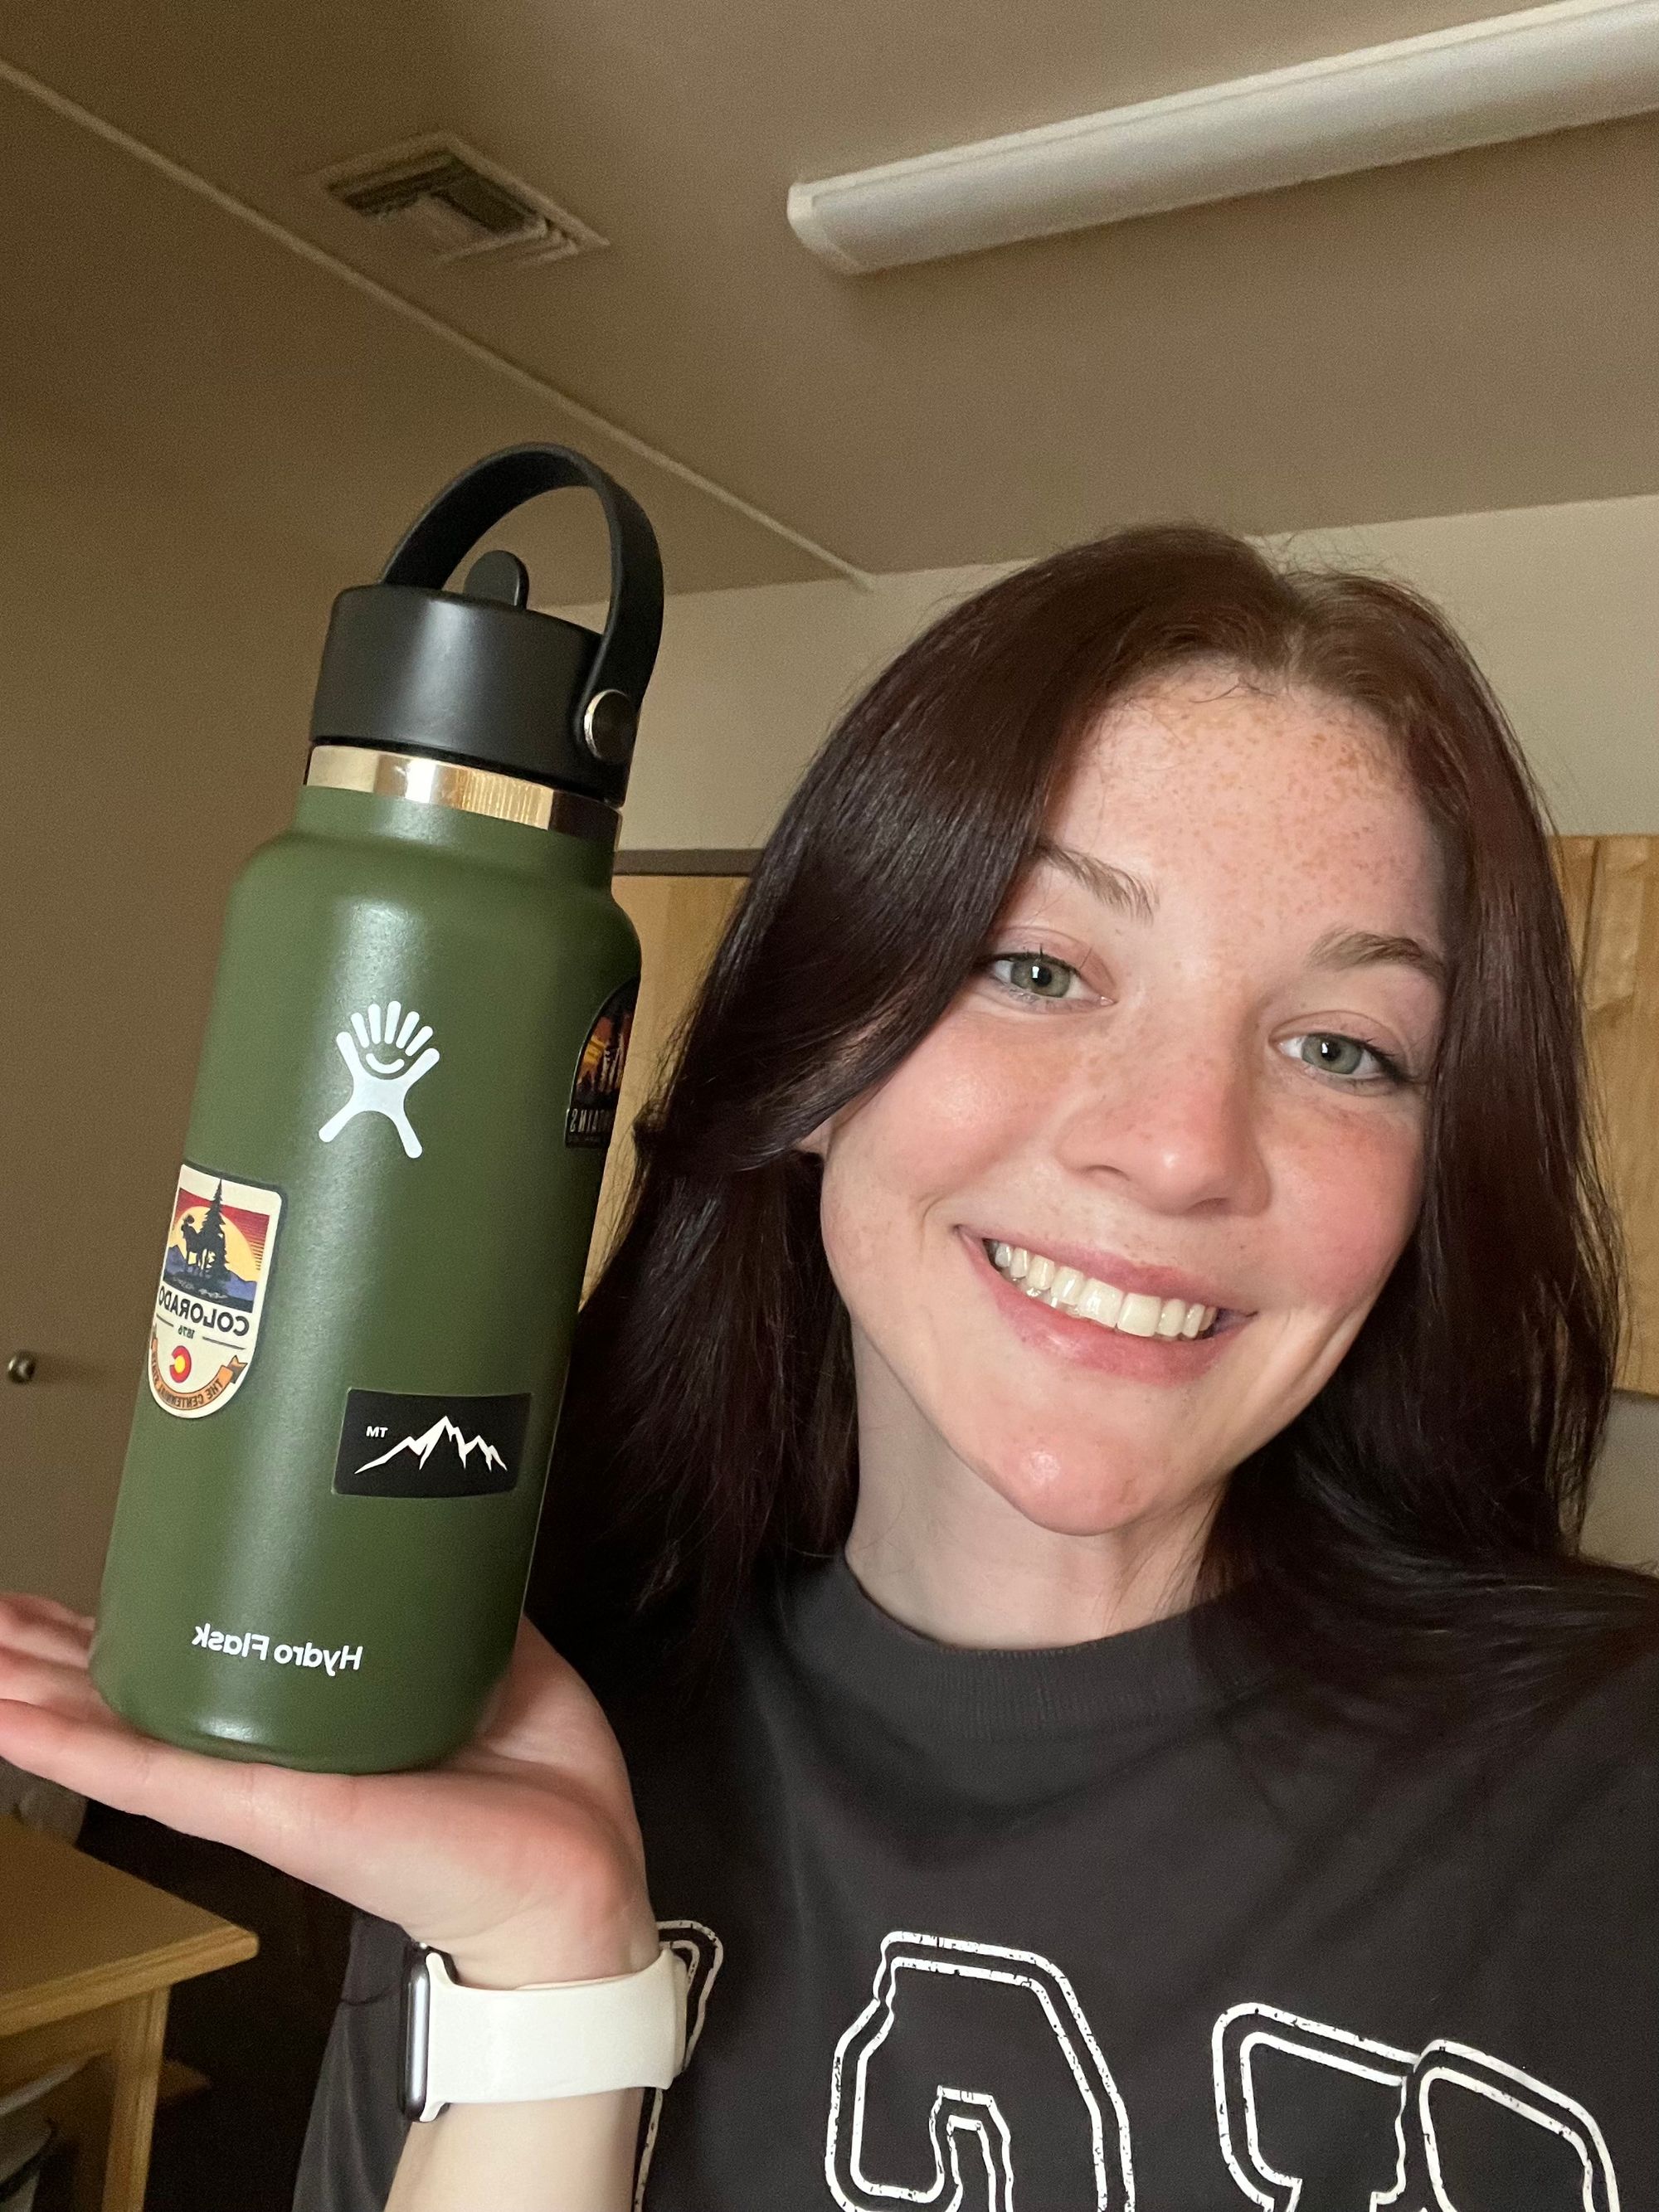 YETI Kids Tumbler Review  Better Than The Hydroflask? 